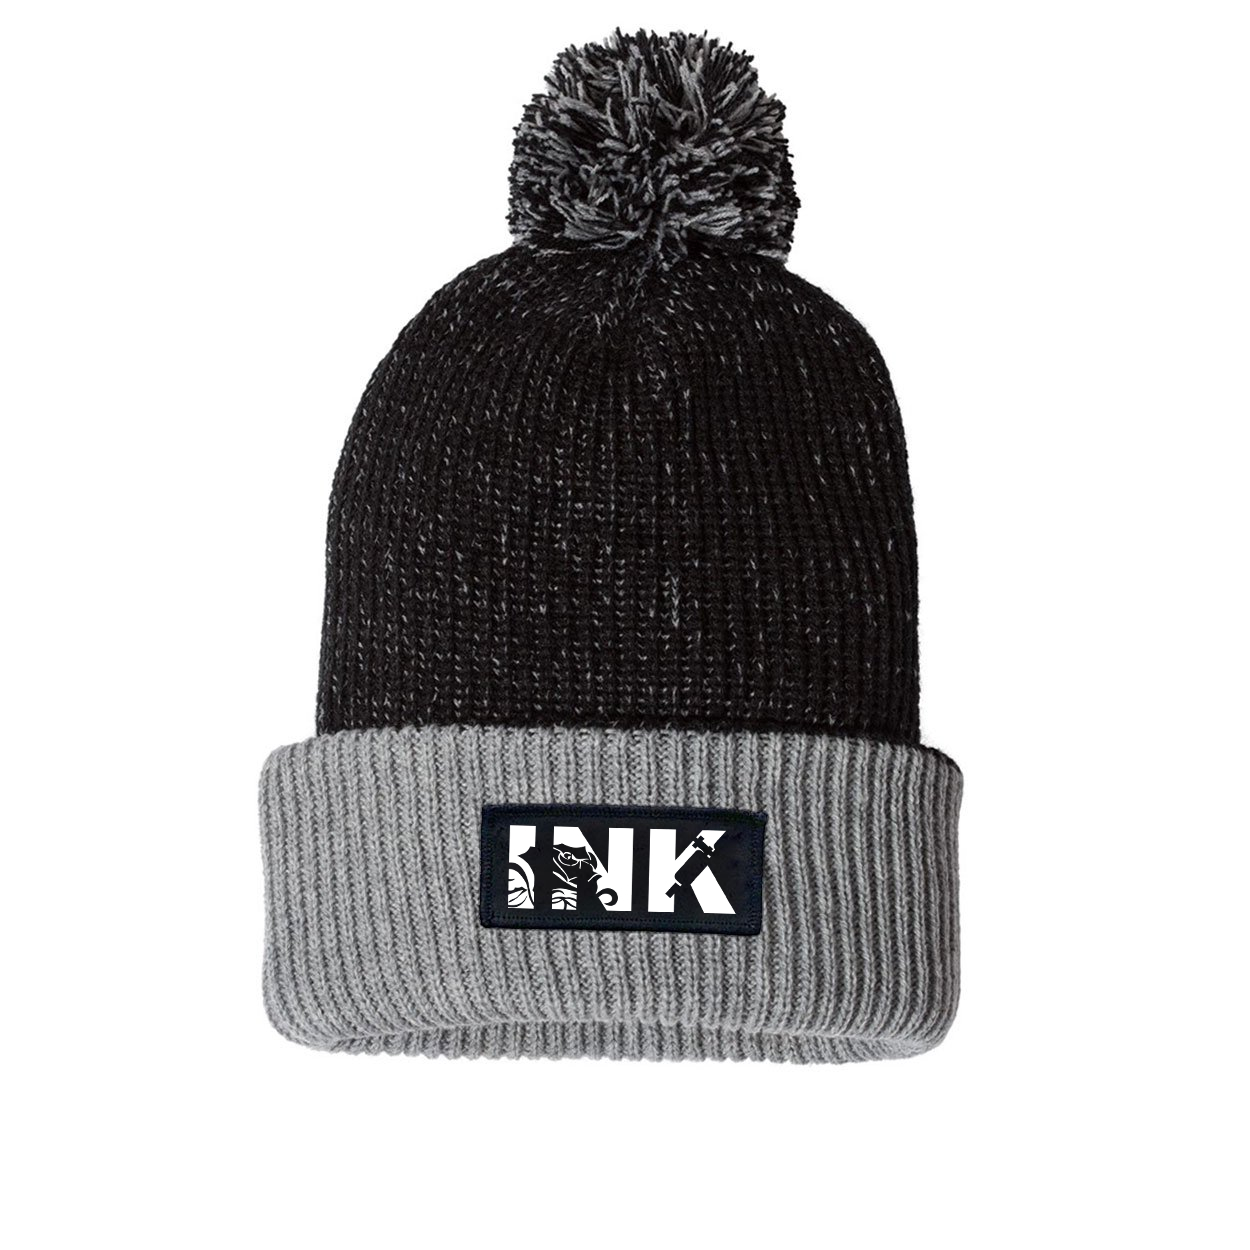 Ink Tattoo Logo Night Out Woven Patch Roll Up Pom Knit Beanie Black/Gray (White Logo)